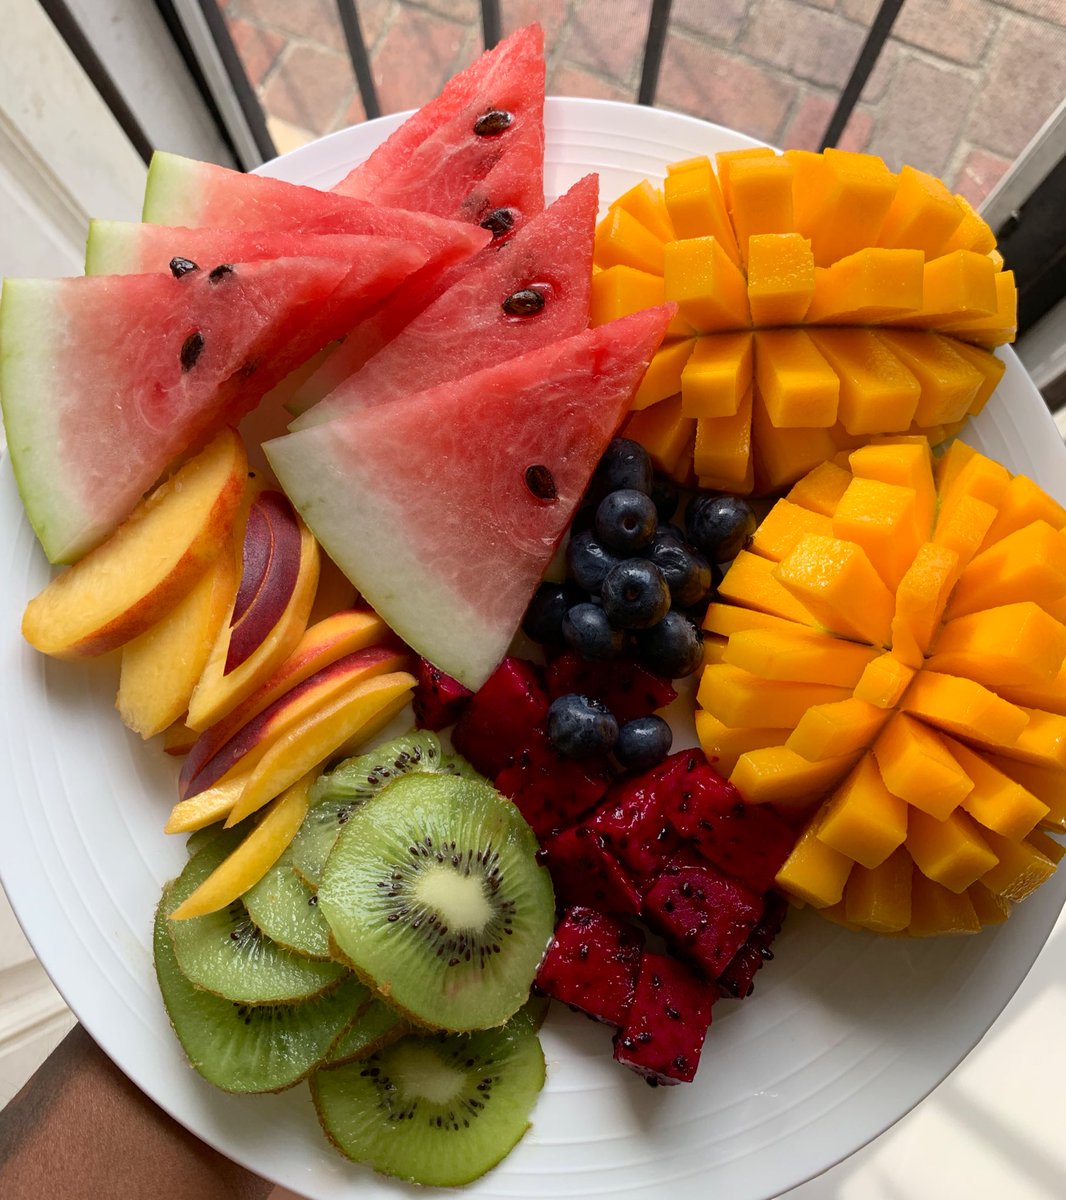 fruit plate 1 or 2? 🍉 🥭 🥝 🫐